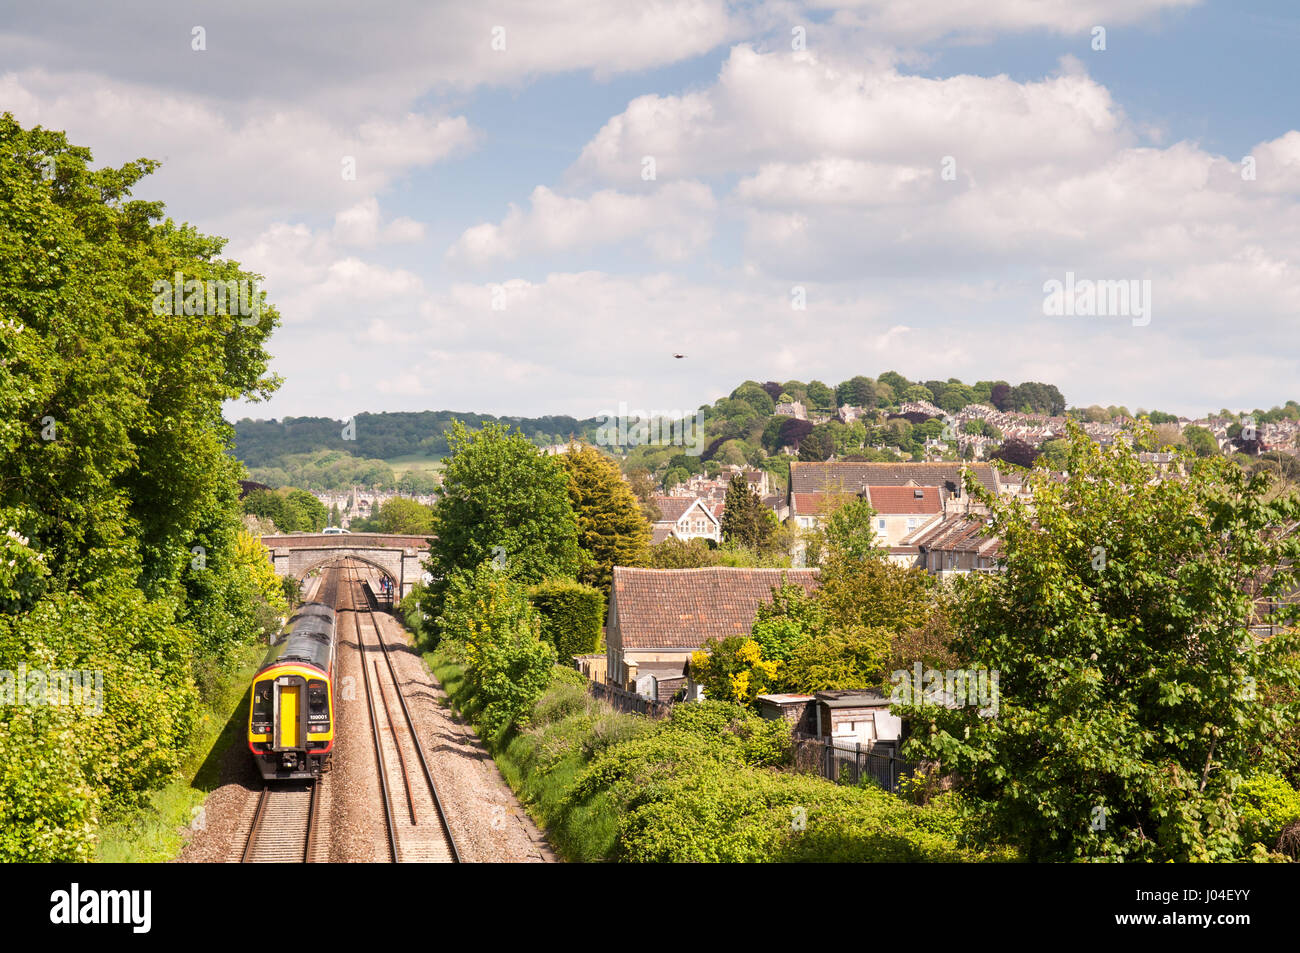 Bath, England, UK - May 25, 2013: A First Great Western Railway Class 158 regional diesel passenger train travels past houses in the suburbs of Bath. Stock Photo